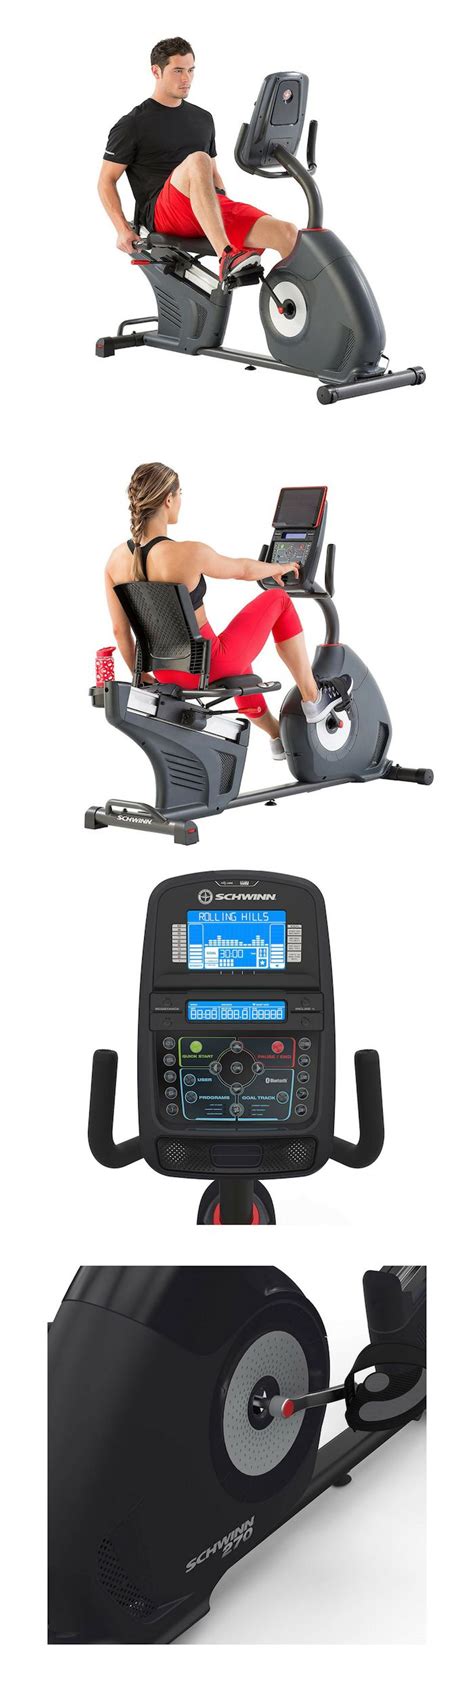 Please note we cannot warranty shipping damage on bikes ordered online since we have no way to verify the. With the Schwinn 270 Recumbent Bike, cardio workouts are ...